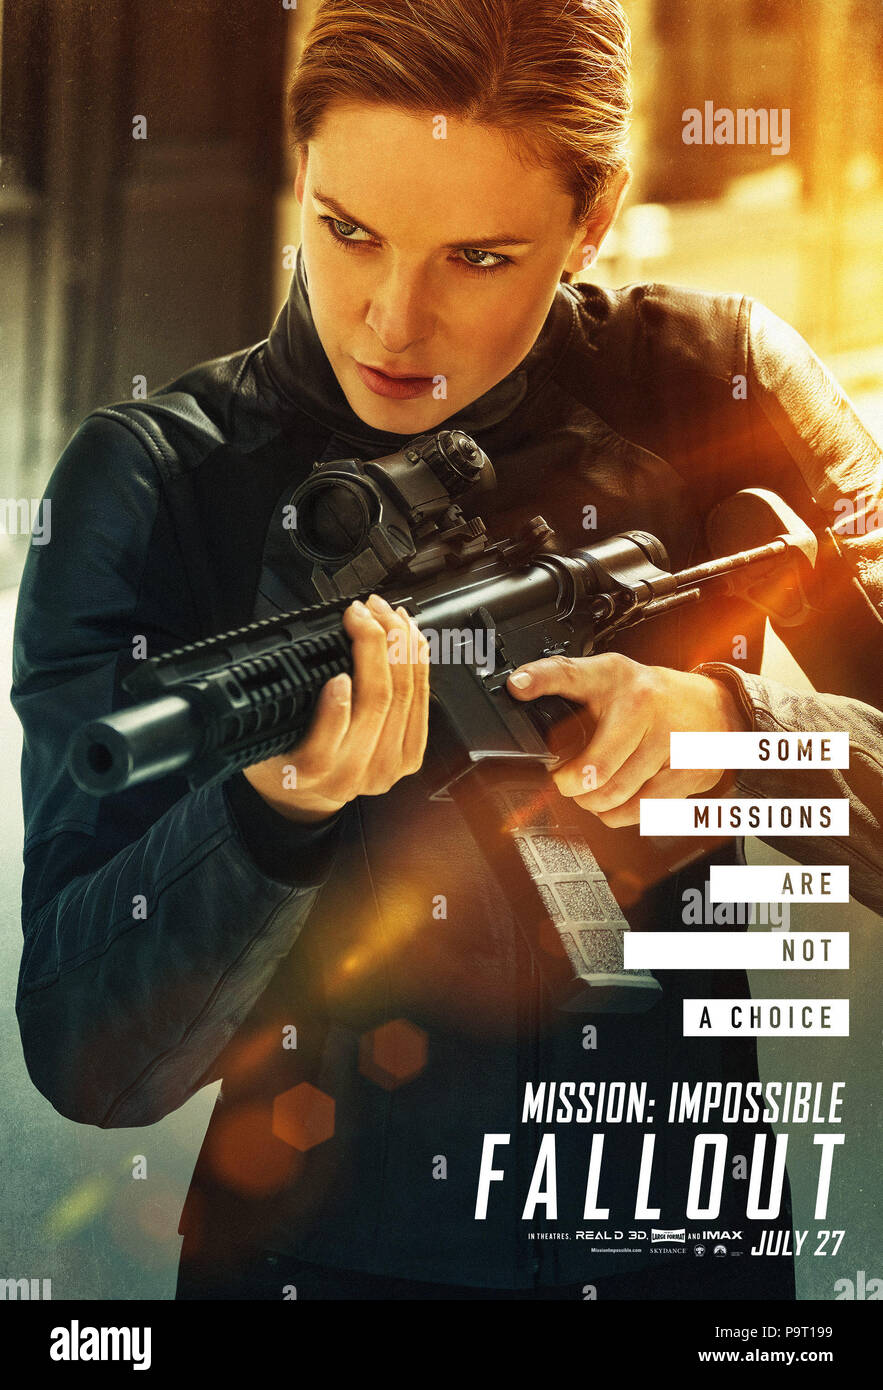 RELEASE DATE: July 27, 2018 TITLE: Mission: Impossible - Fallout STUDIO: Paramount Pictures DIRECTOR: Christopher McQuarrie PLOT: Ethan Hunt and his IMF team, along with some familiar allies, race against time after a mission gone wrong. STARRING: Poster art REBECCA FERGUSON as Ilsa Faust. (Credit Image: © Paramount Pictures/Entertainment Pictures) Stock Photo